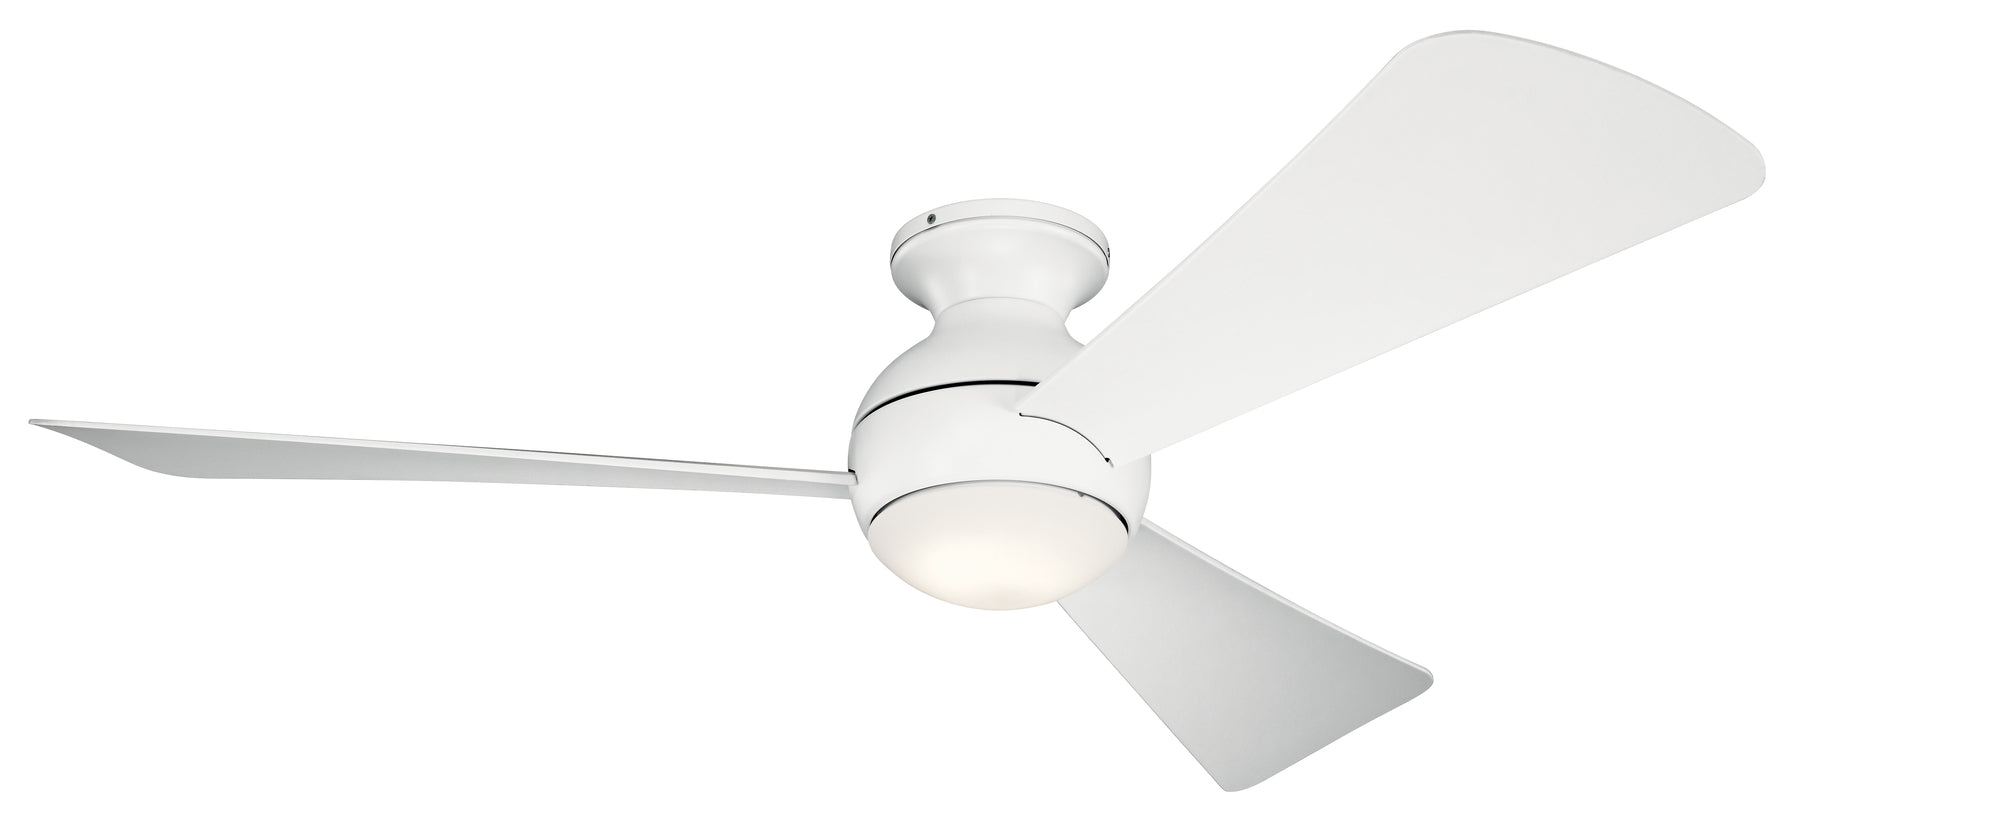 SOLA Ceiling fan White INTEGRATED LED - 330152MWH | KICHLER